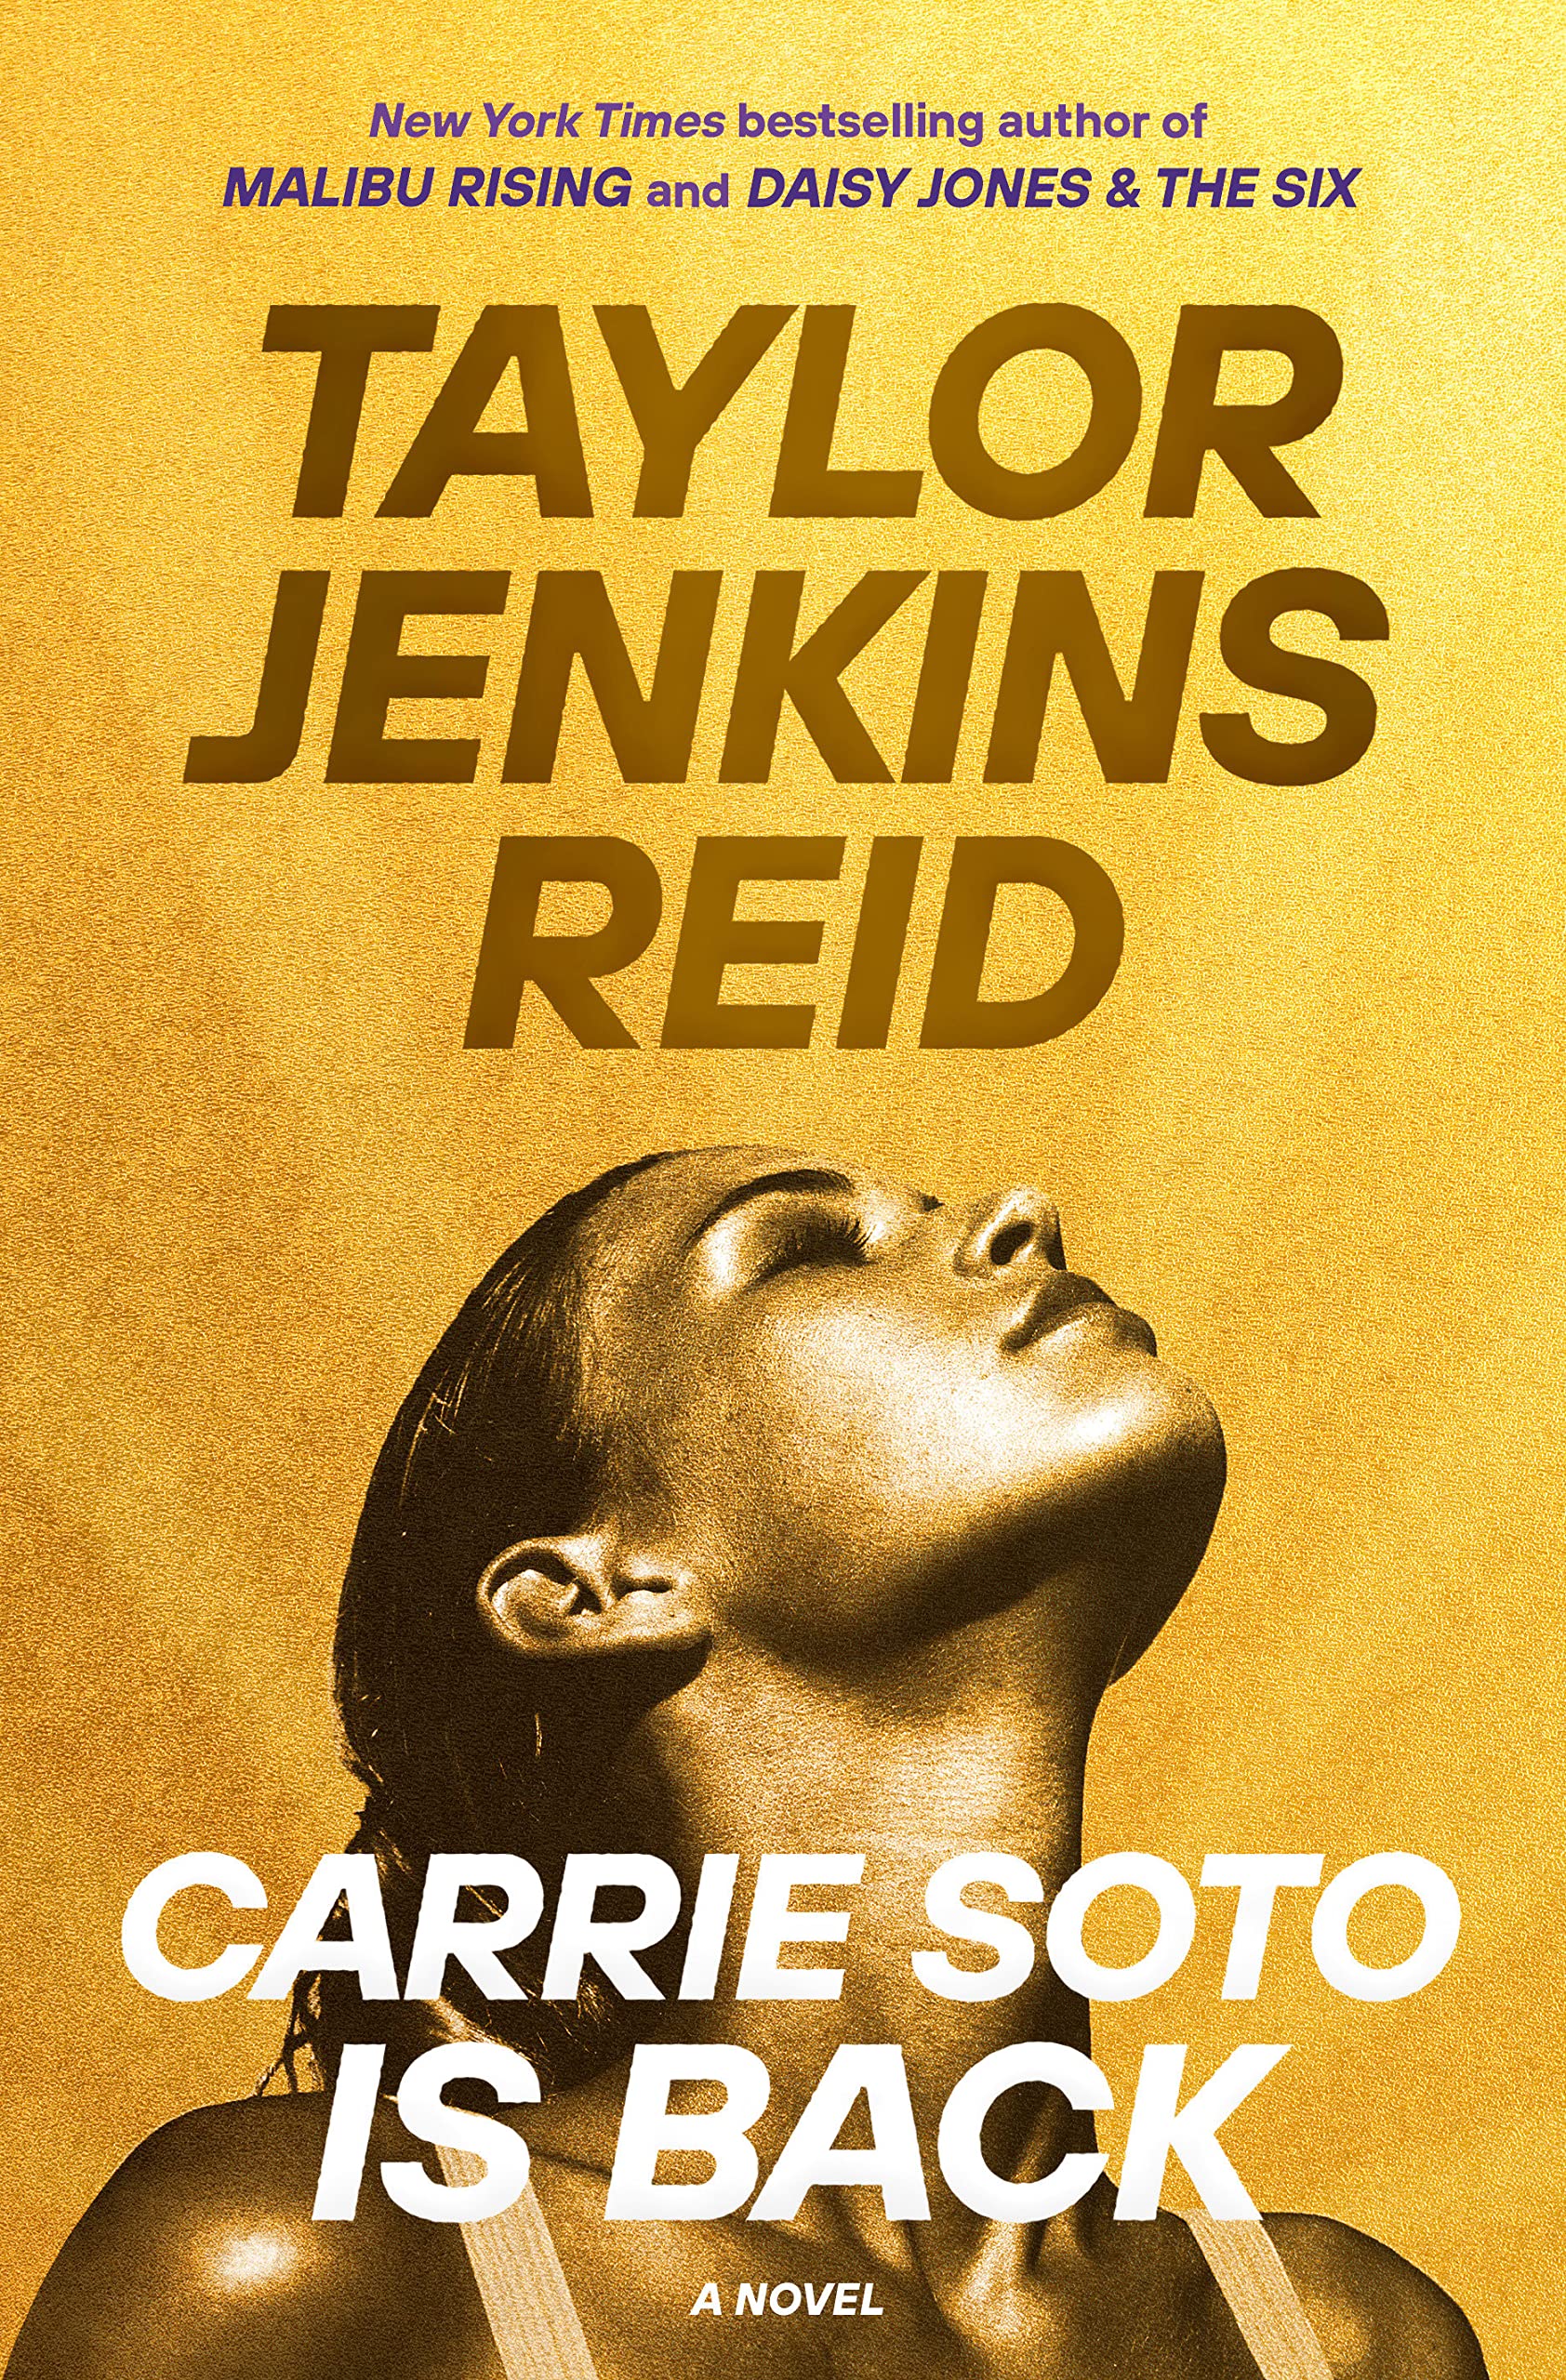 Cover of "Carrie Soto is Back" by Taylor Jenkins Reid